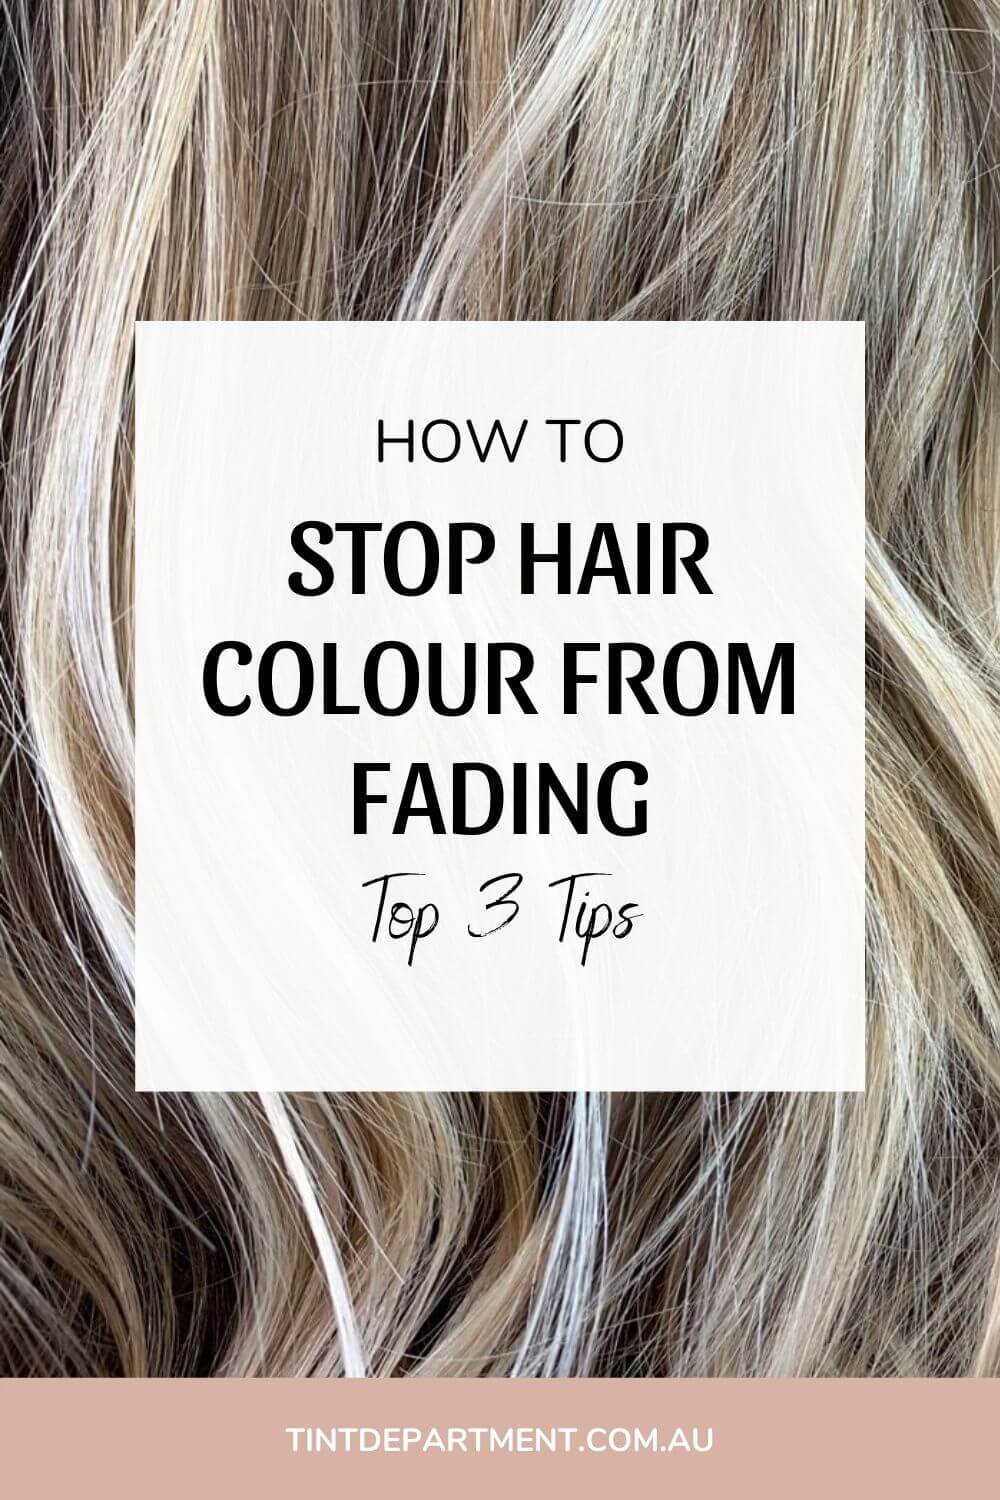 How To Stop Hair Colour From Fading - Top 3 Tips